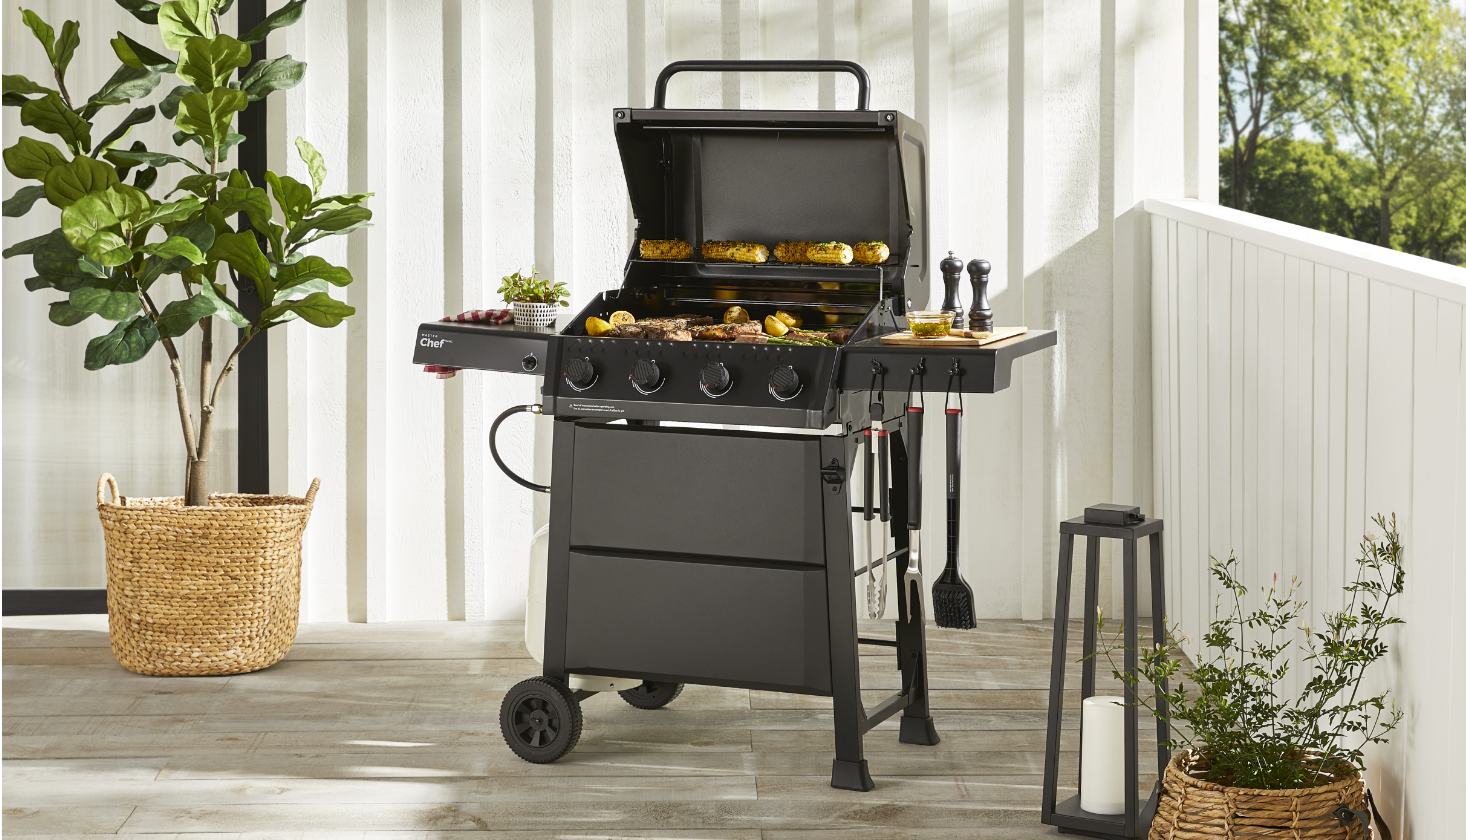 A MASTER Chef Discover Propane BBQ and grilling accessories on a patio.